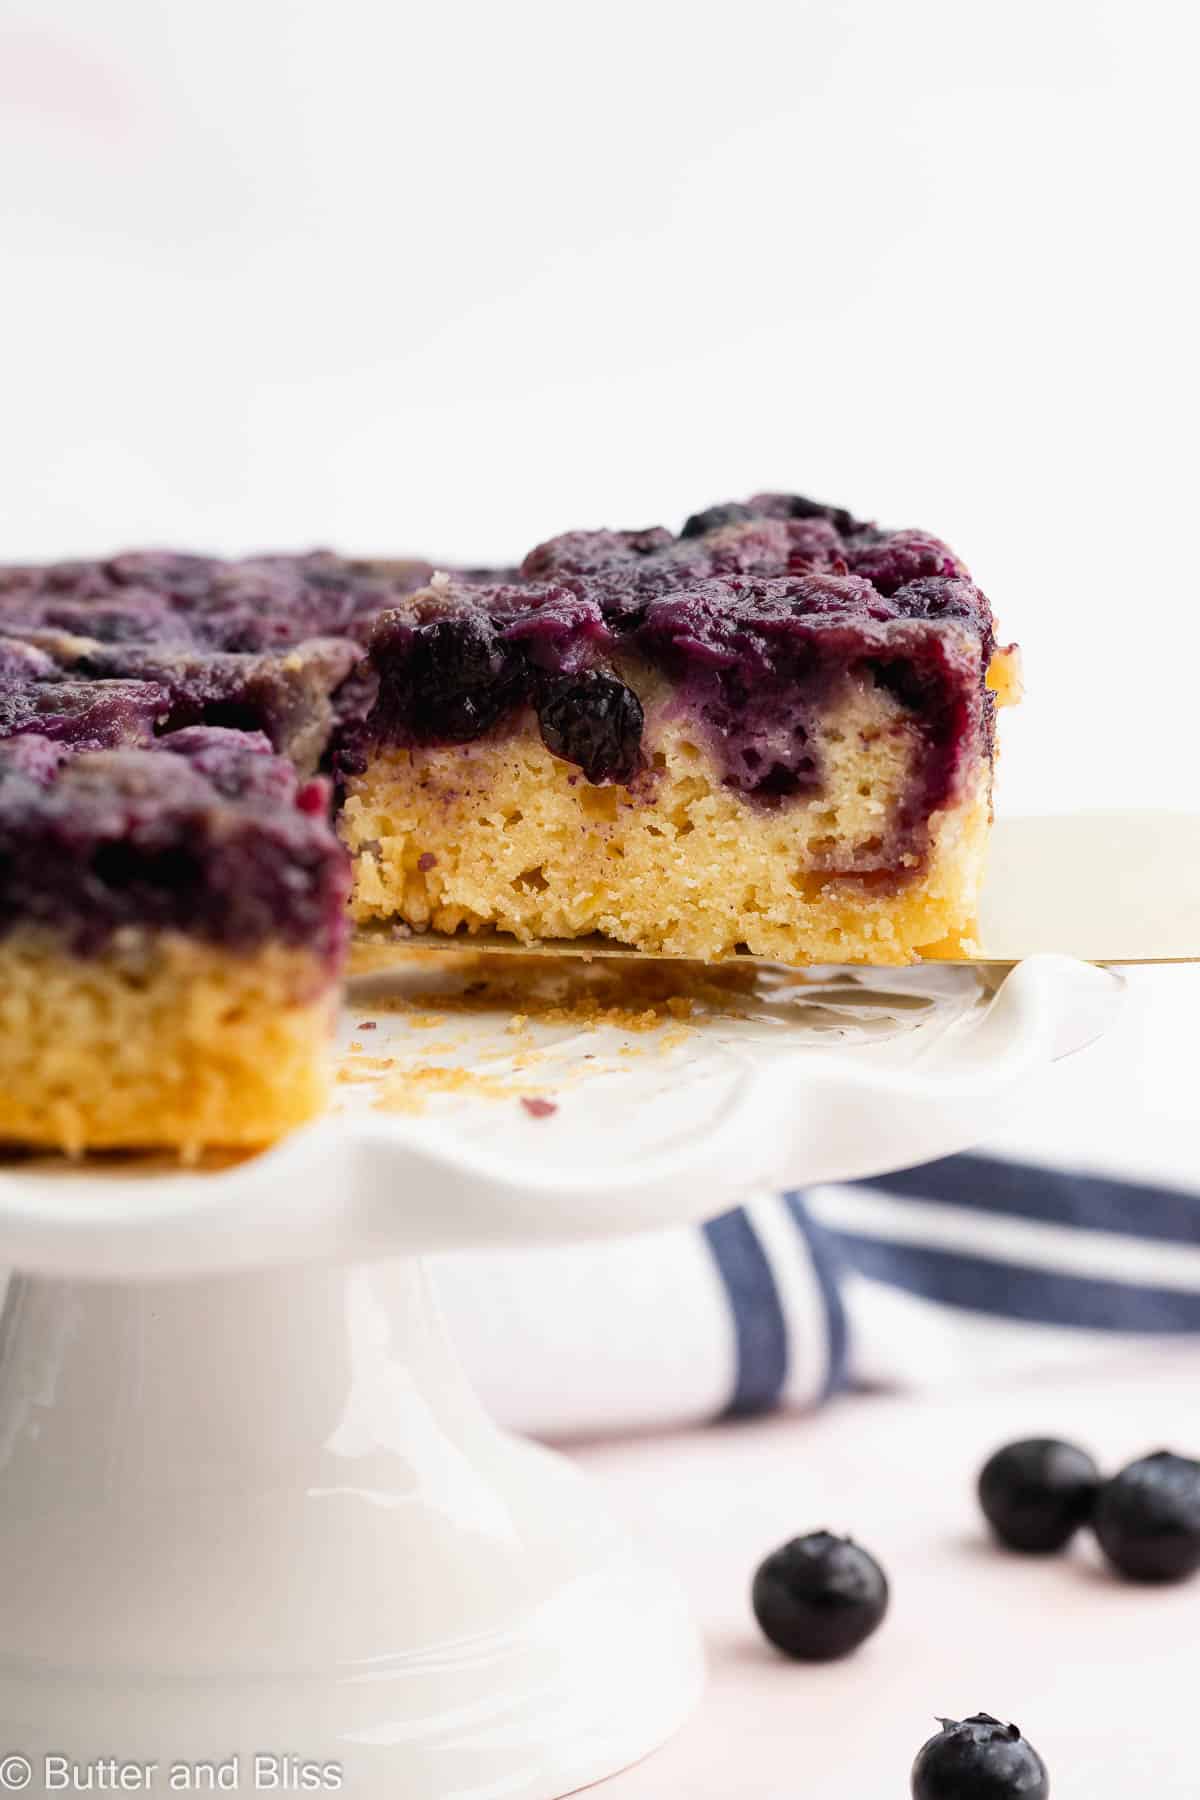 A slice of blueberry lemon upside down cake being cut from the small cake.